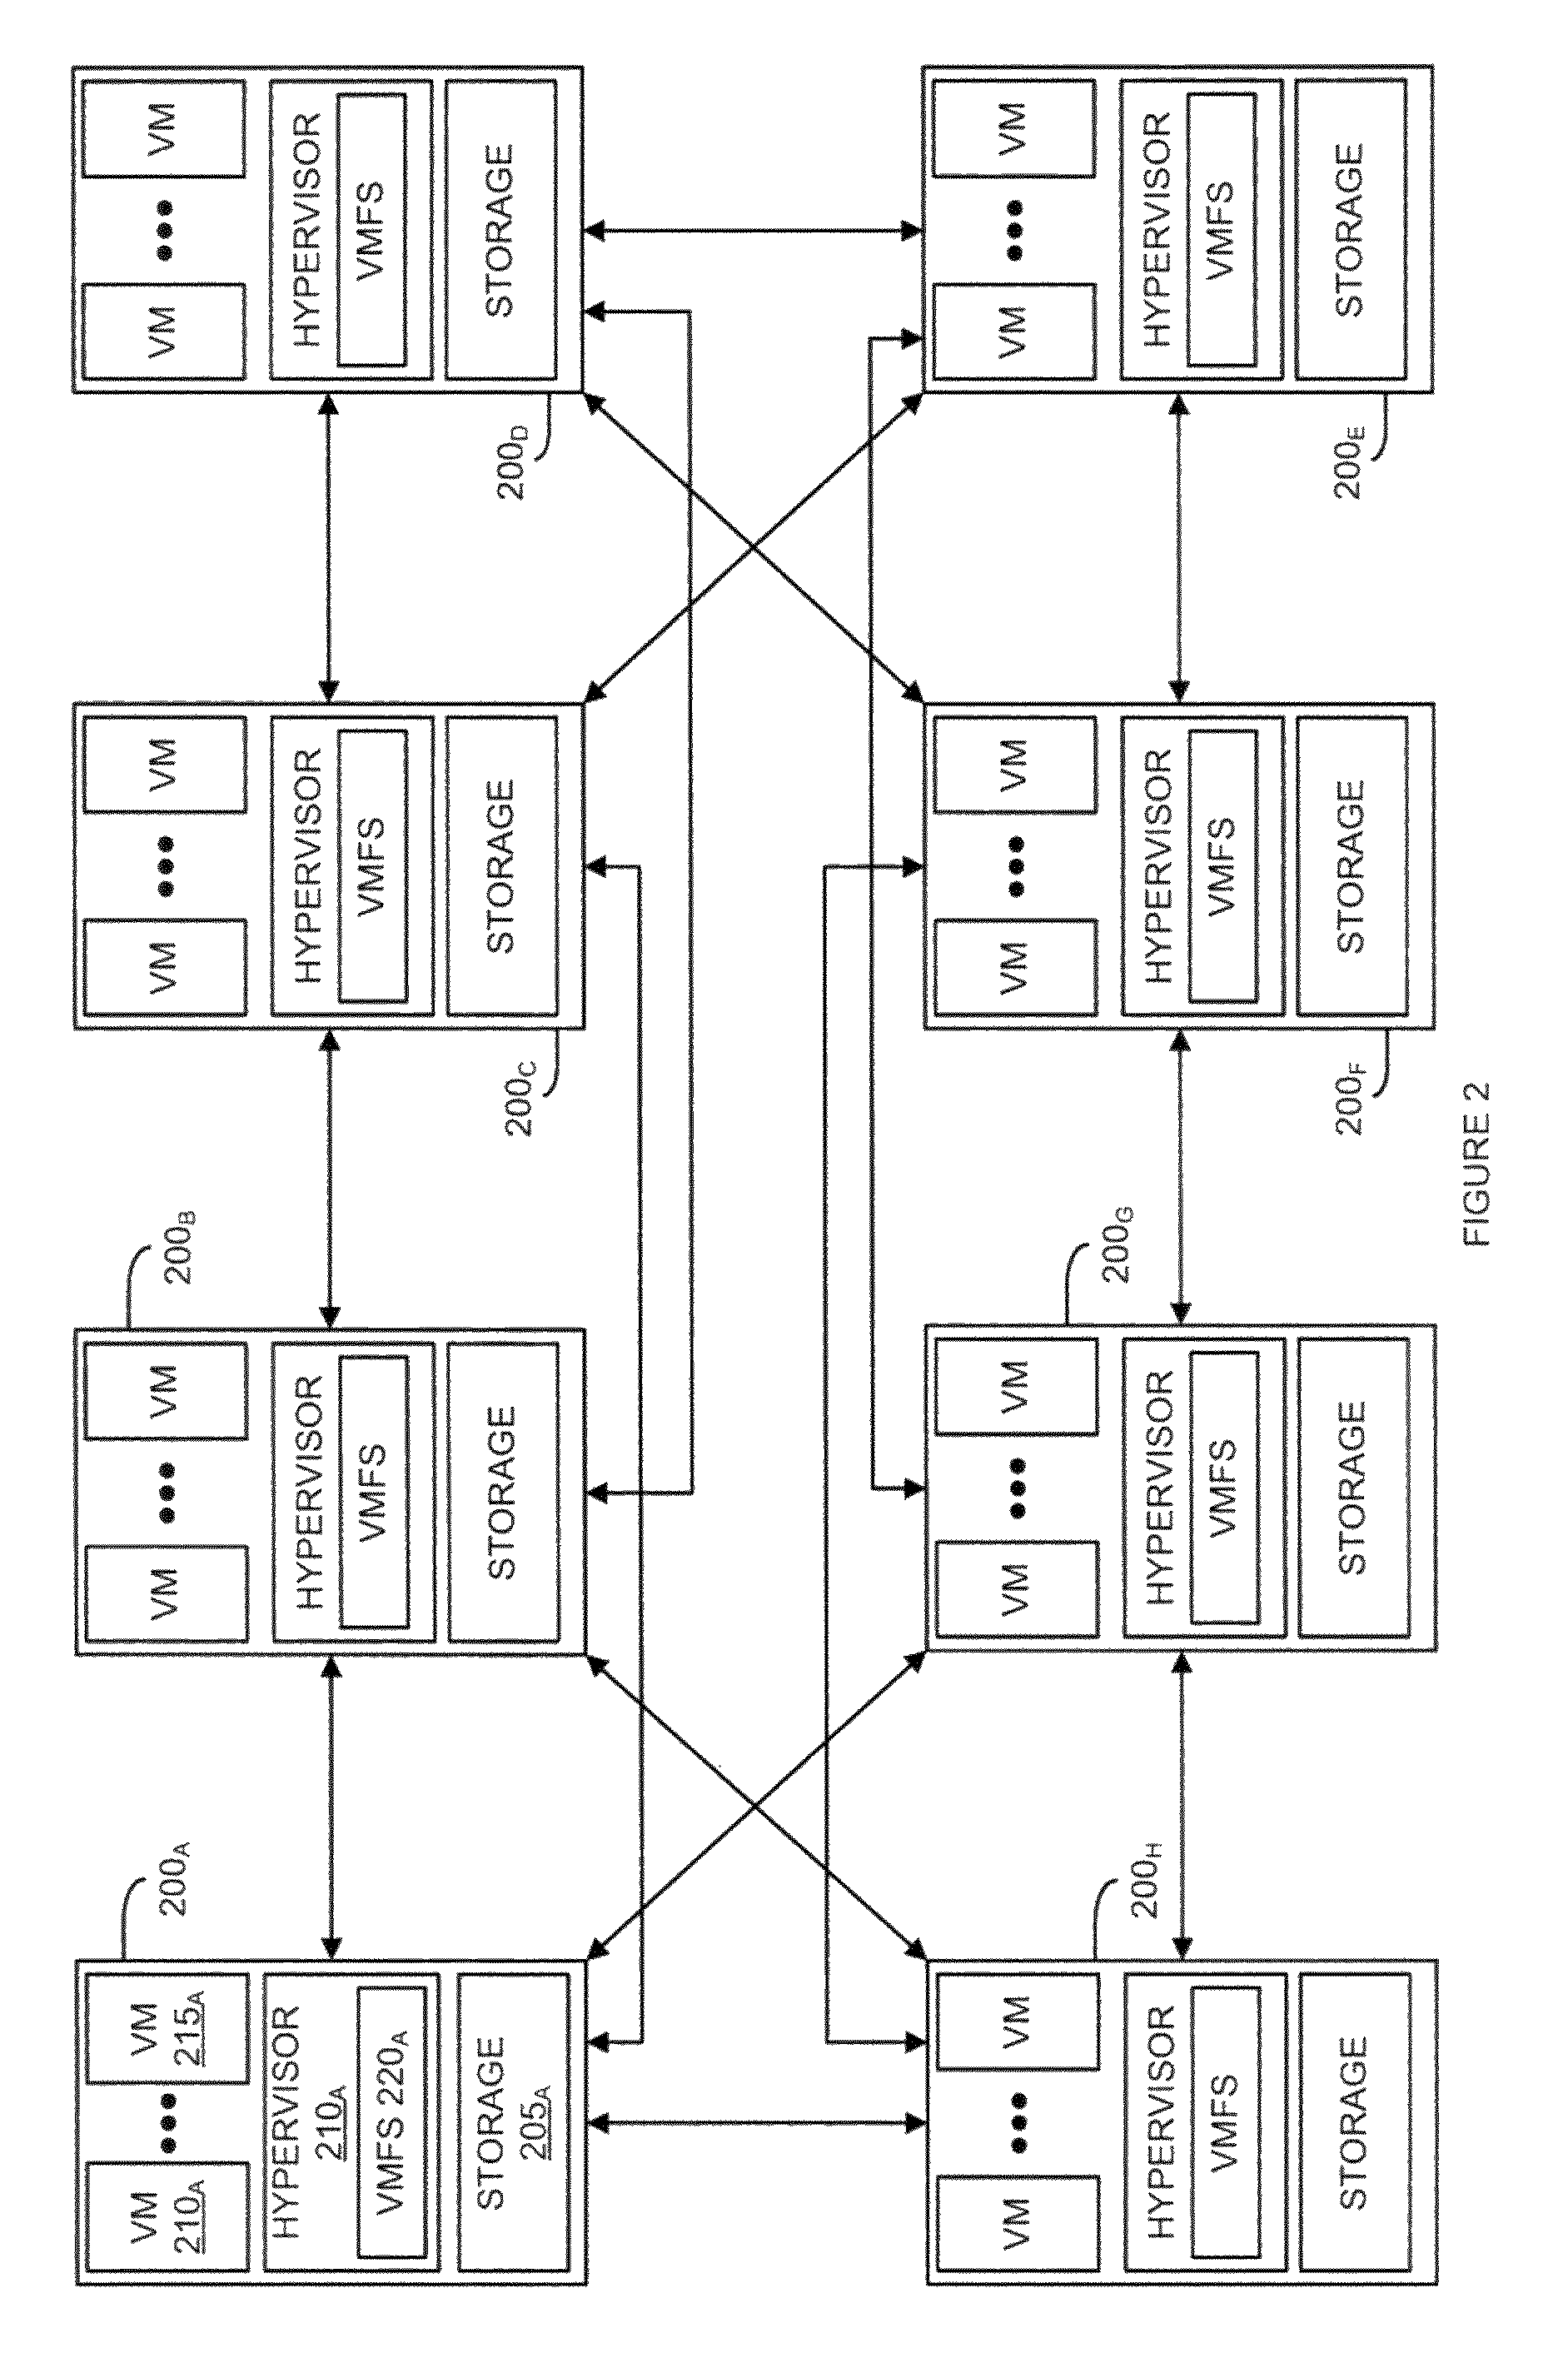 Method for voting with secret shares in a distributed system